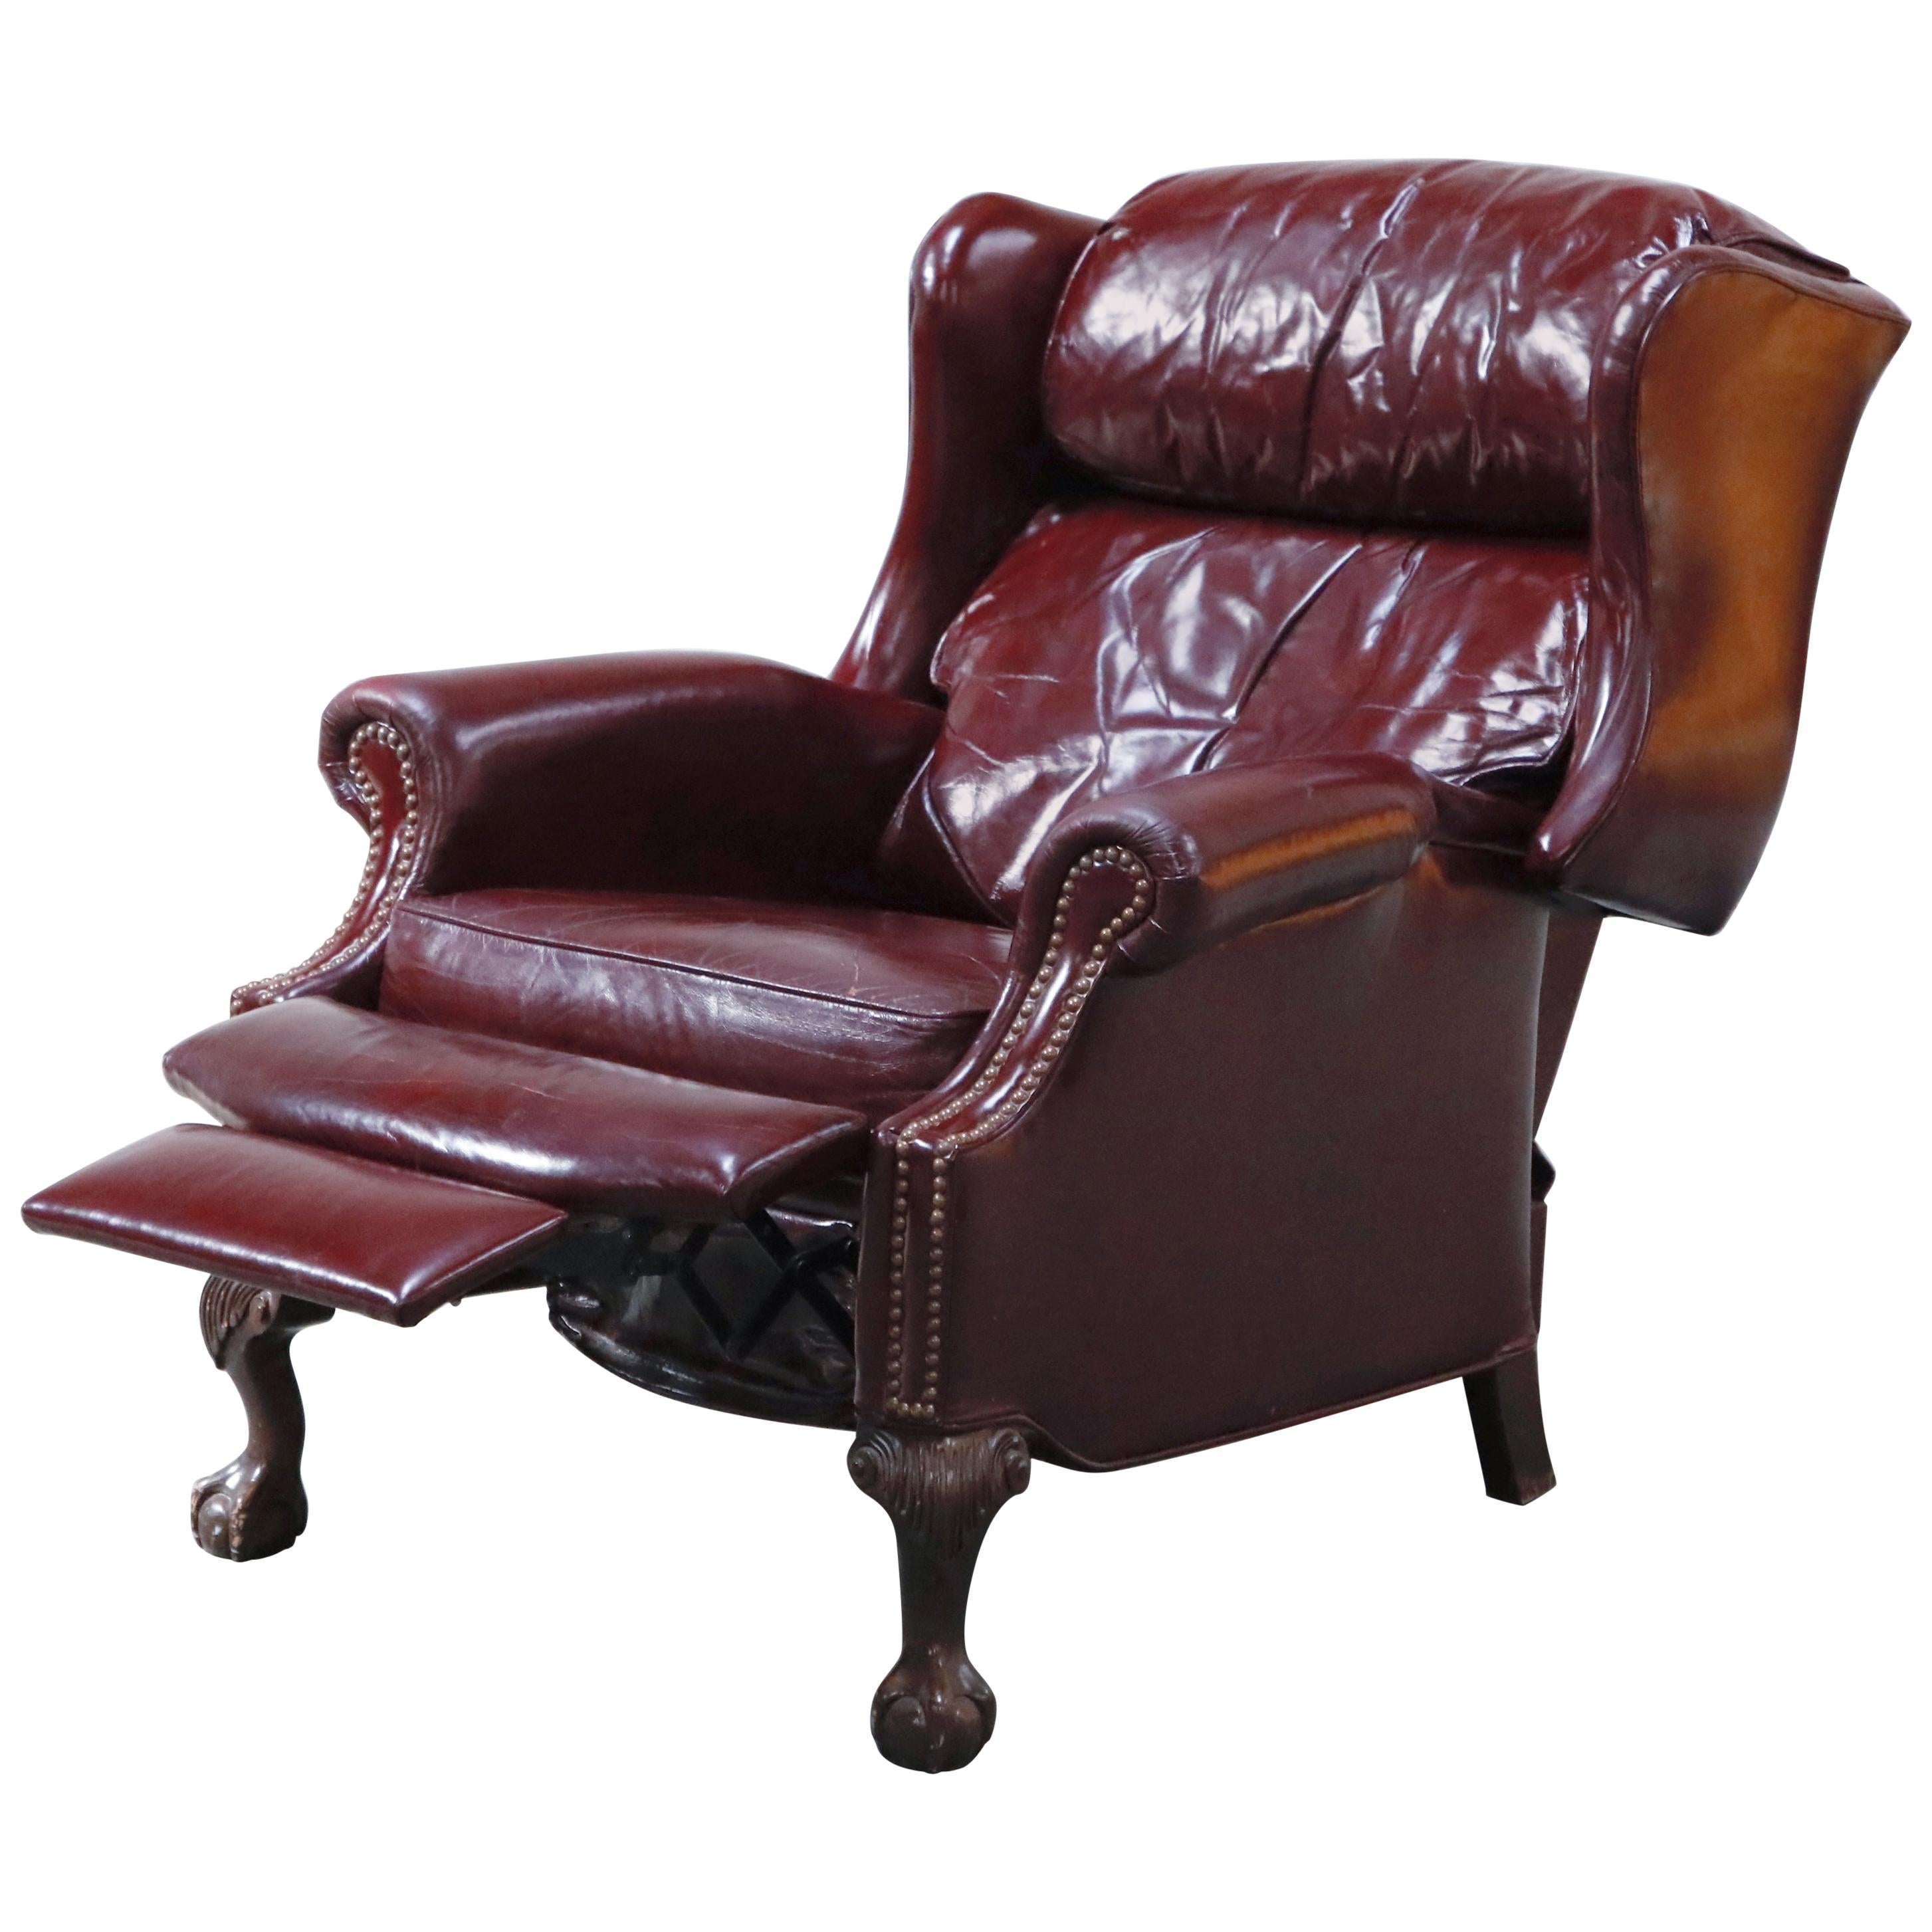 Reclining Napoleon III Style Wingback Library Armchair in Burgundy Leather